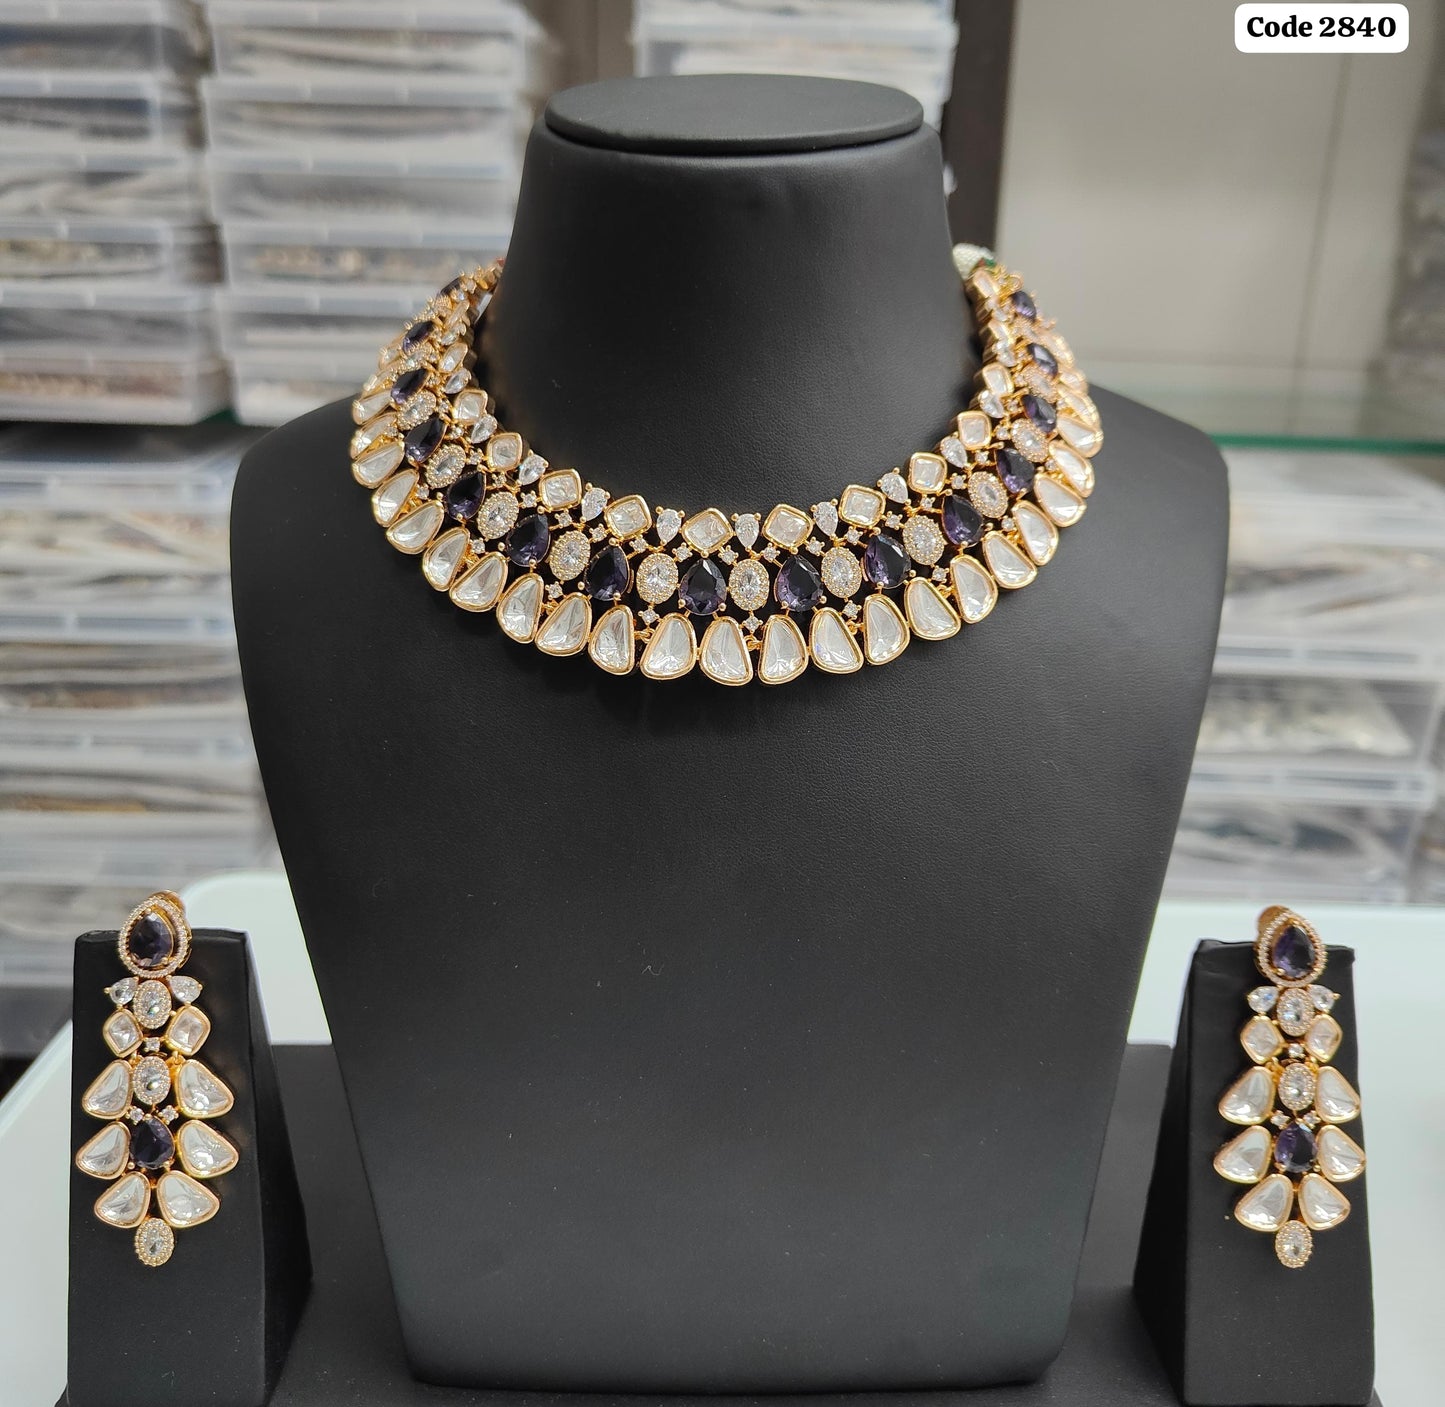 Glimmering Radiance: Premium Kundan Necklace Set with Earrings